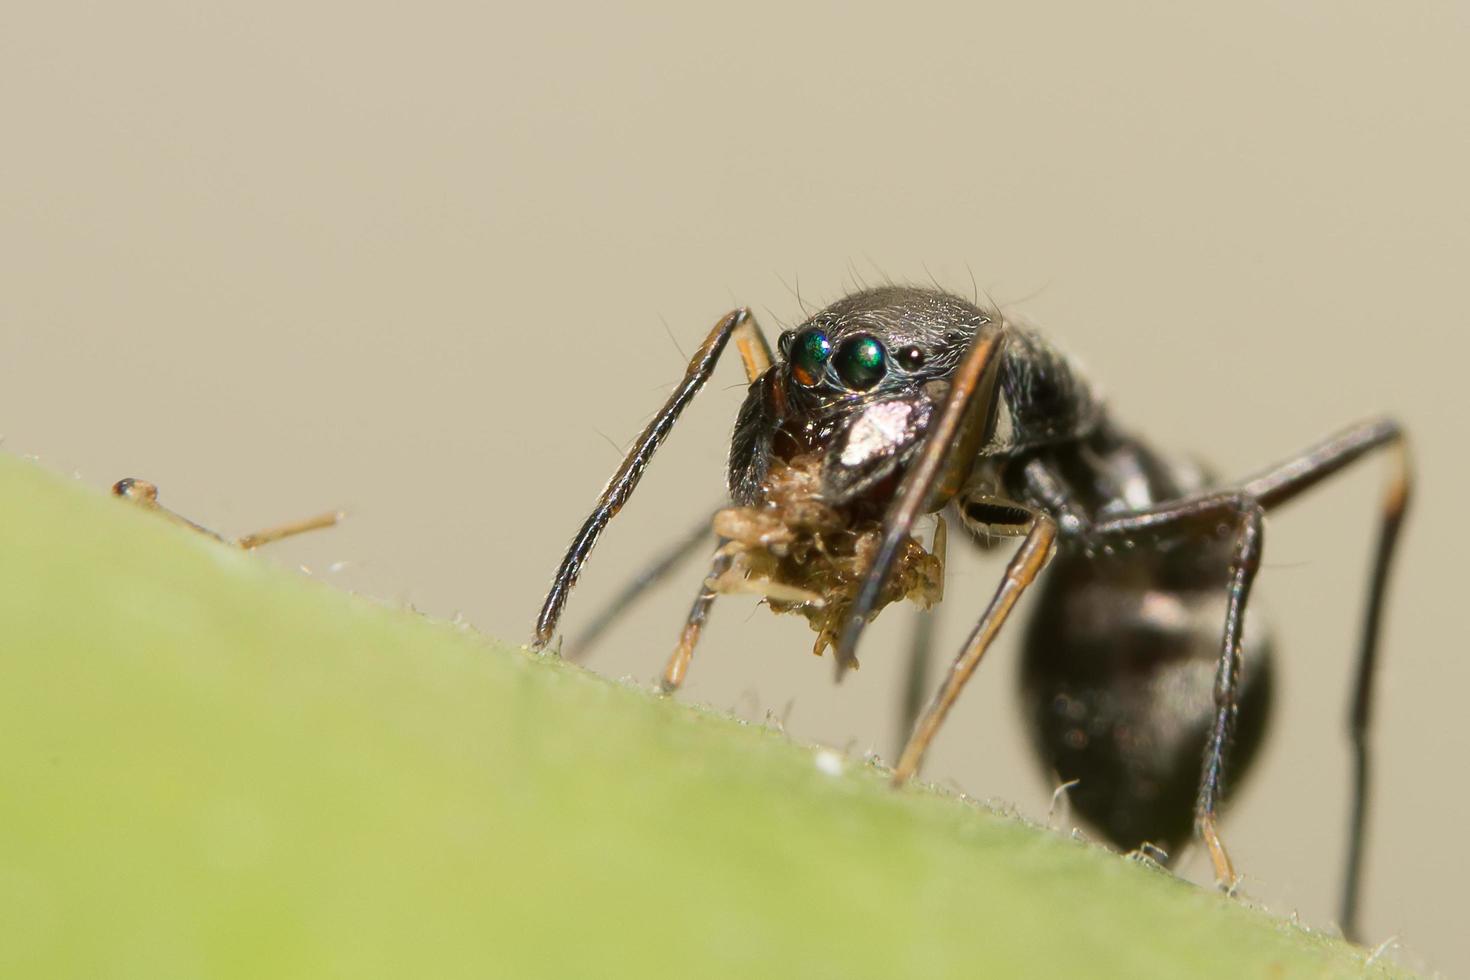 Giant ant-like jumping spider close-up photo